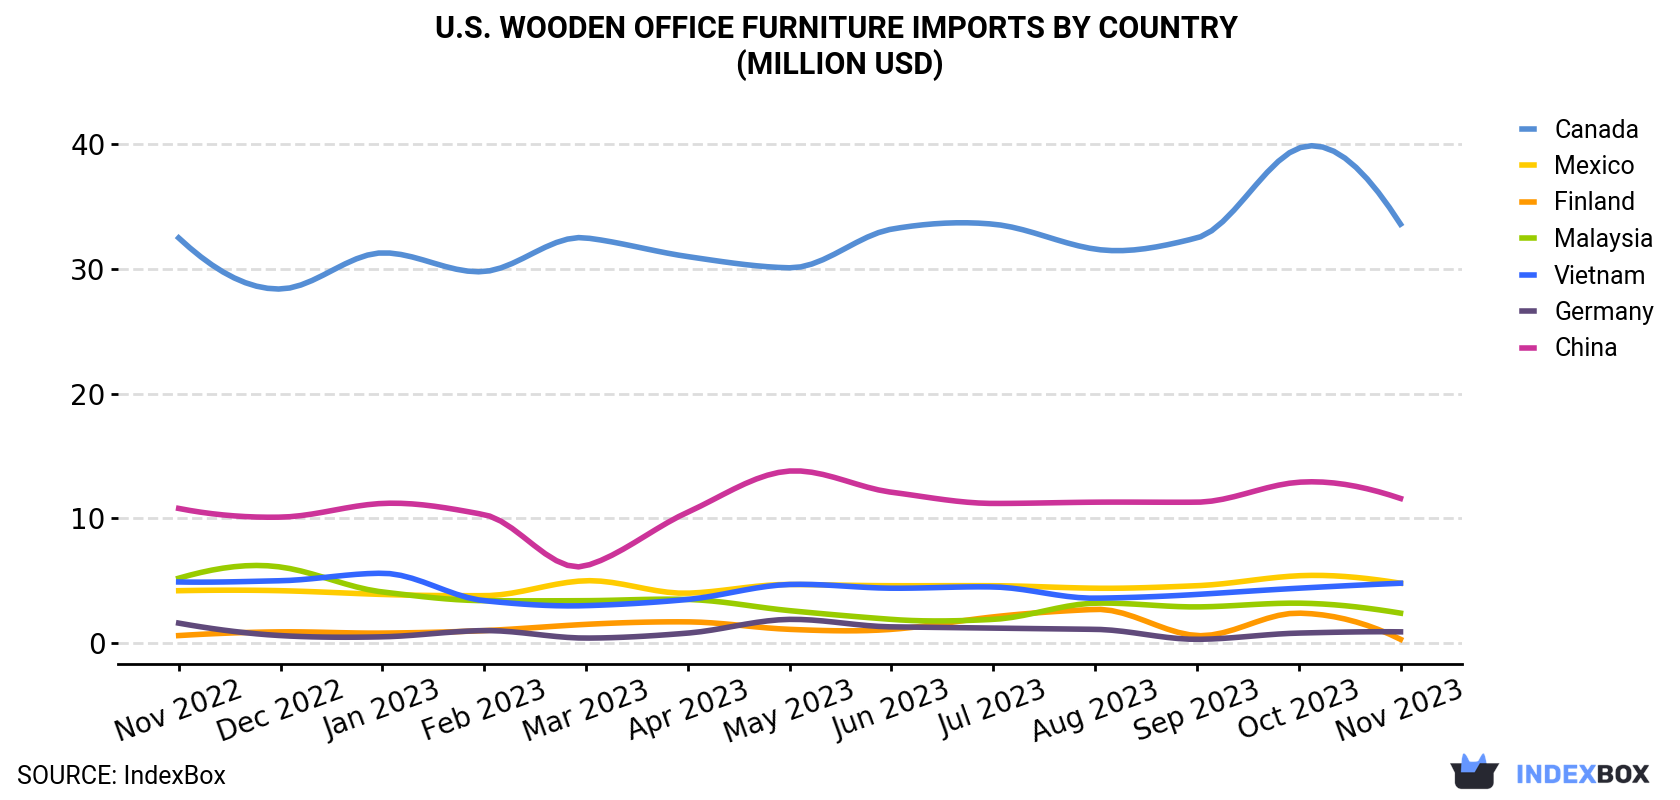 U.S. Wooden Office Furniture Imports By Country (Million USD)